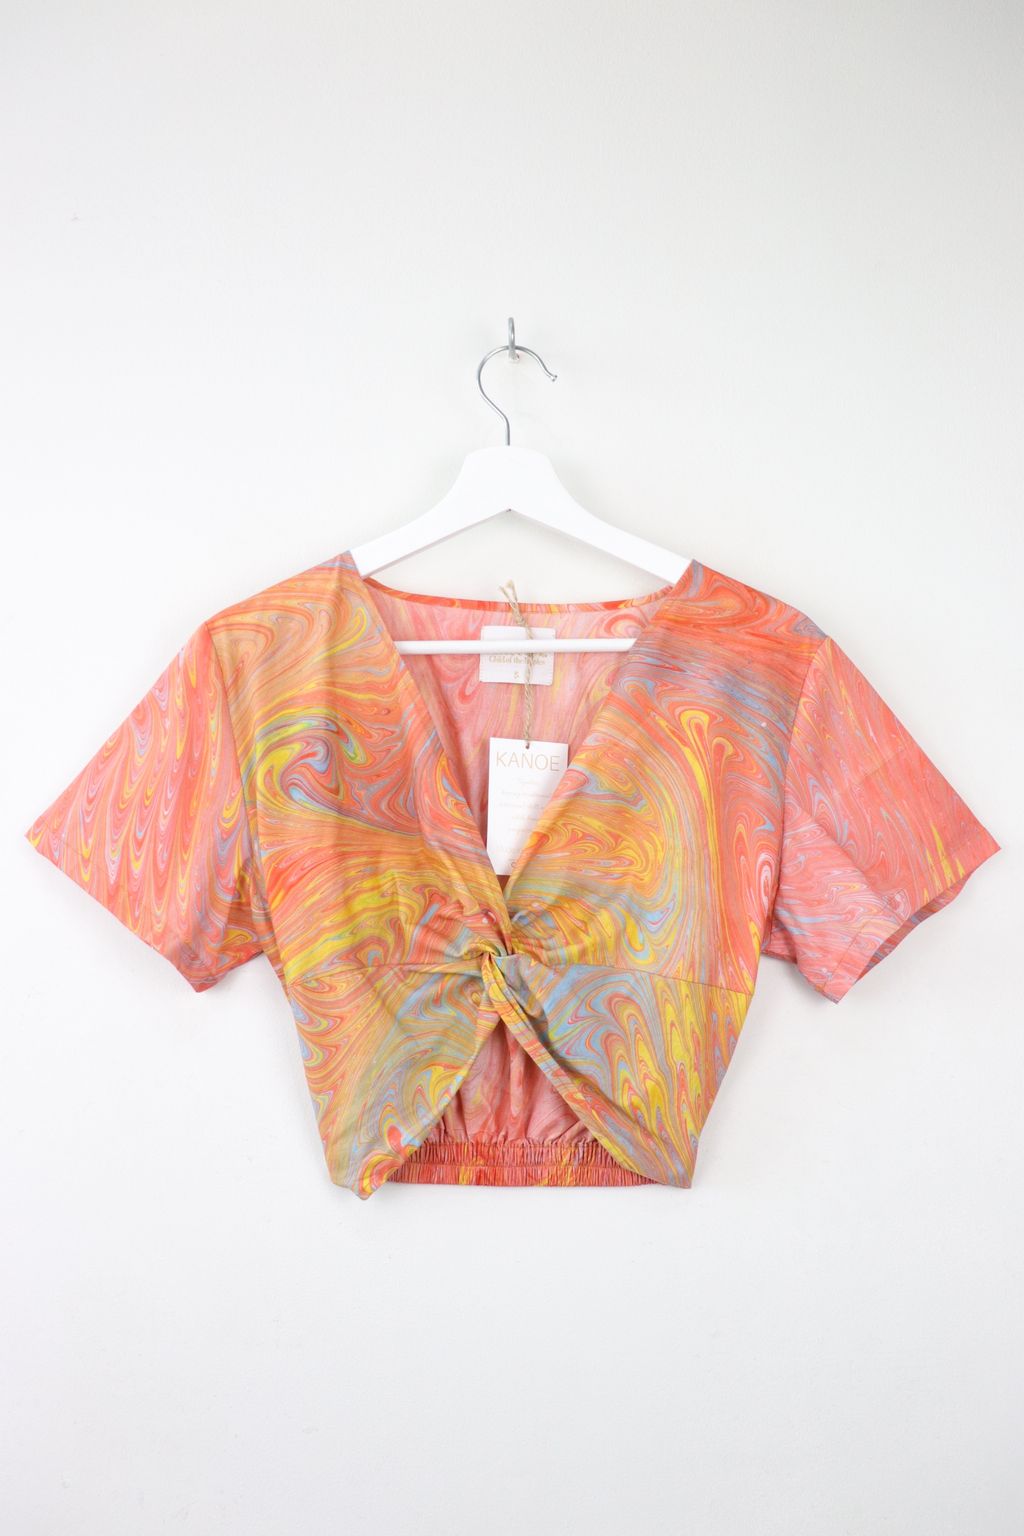 handmarbled-twisted-top-A21